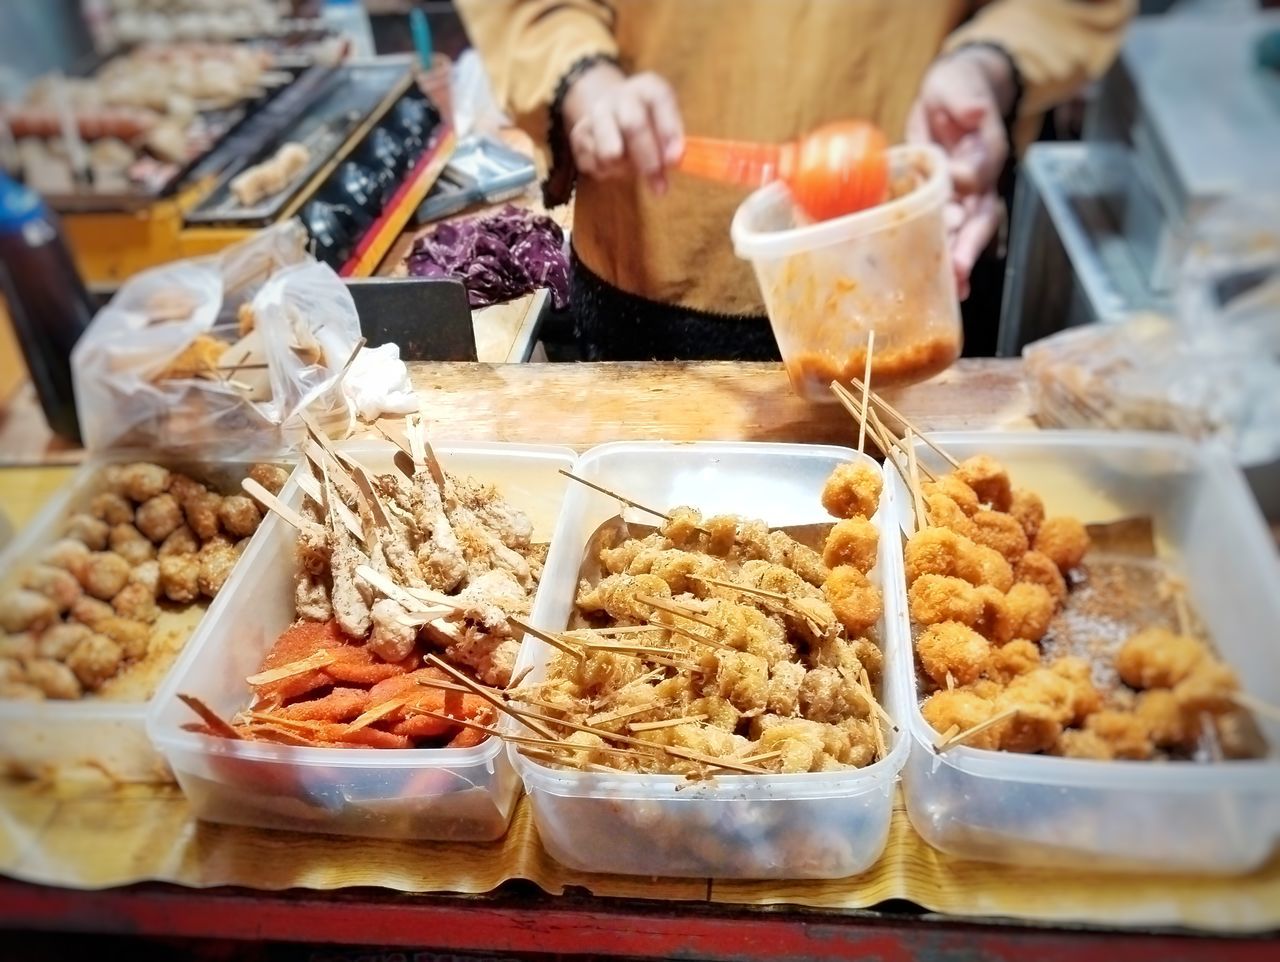 food and drink, food, fast food, freshness, meal, business, market, brunch, market stall, dish, retail, variation, business finance and industry, abundance, breakfast, hand, adult, concession stand, street food, container, small business, one person, snack, healthy eating, indoors, selective focus, lunch, midsection, for sale, selling